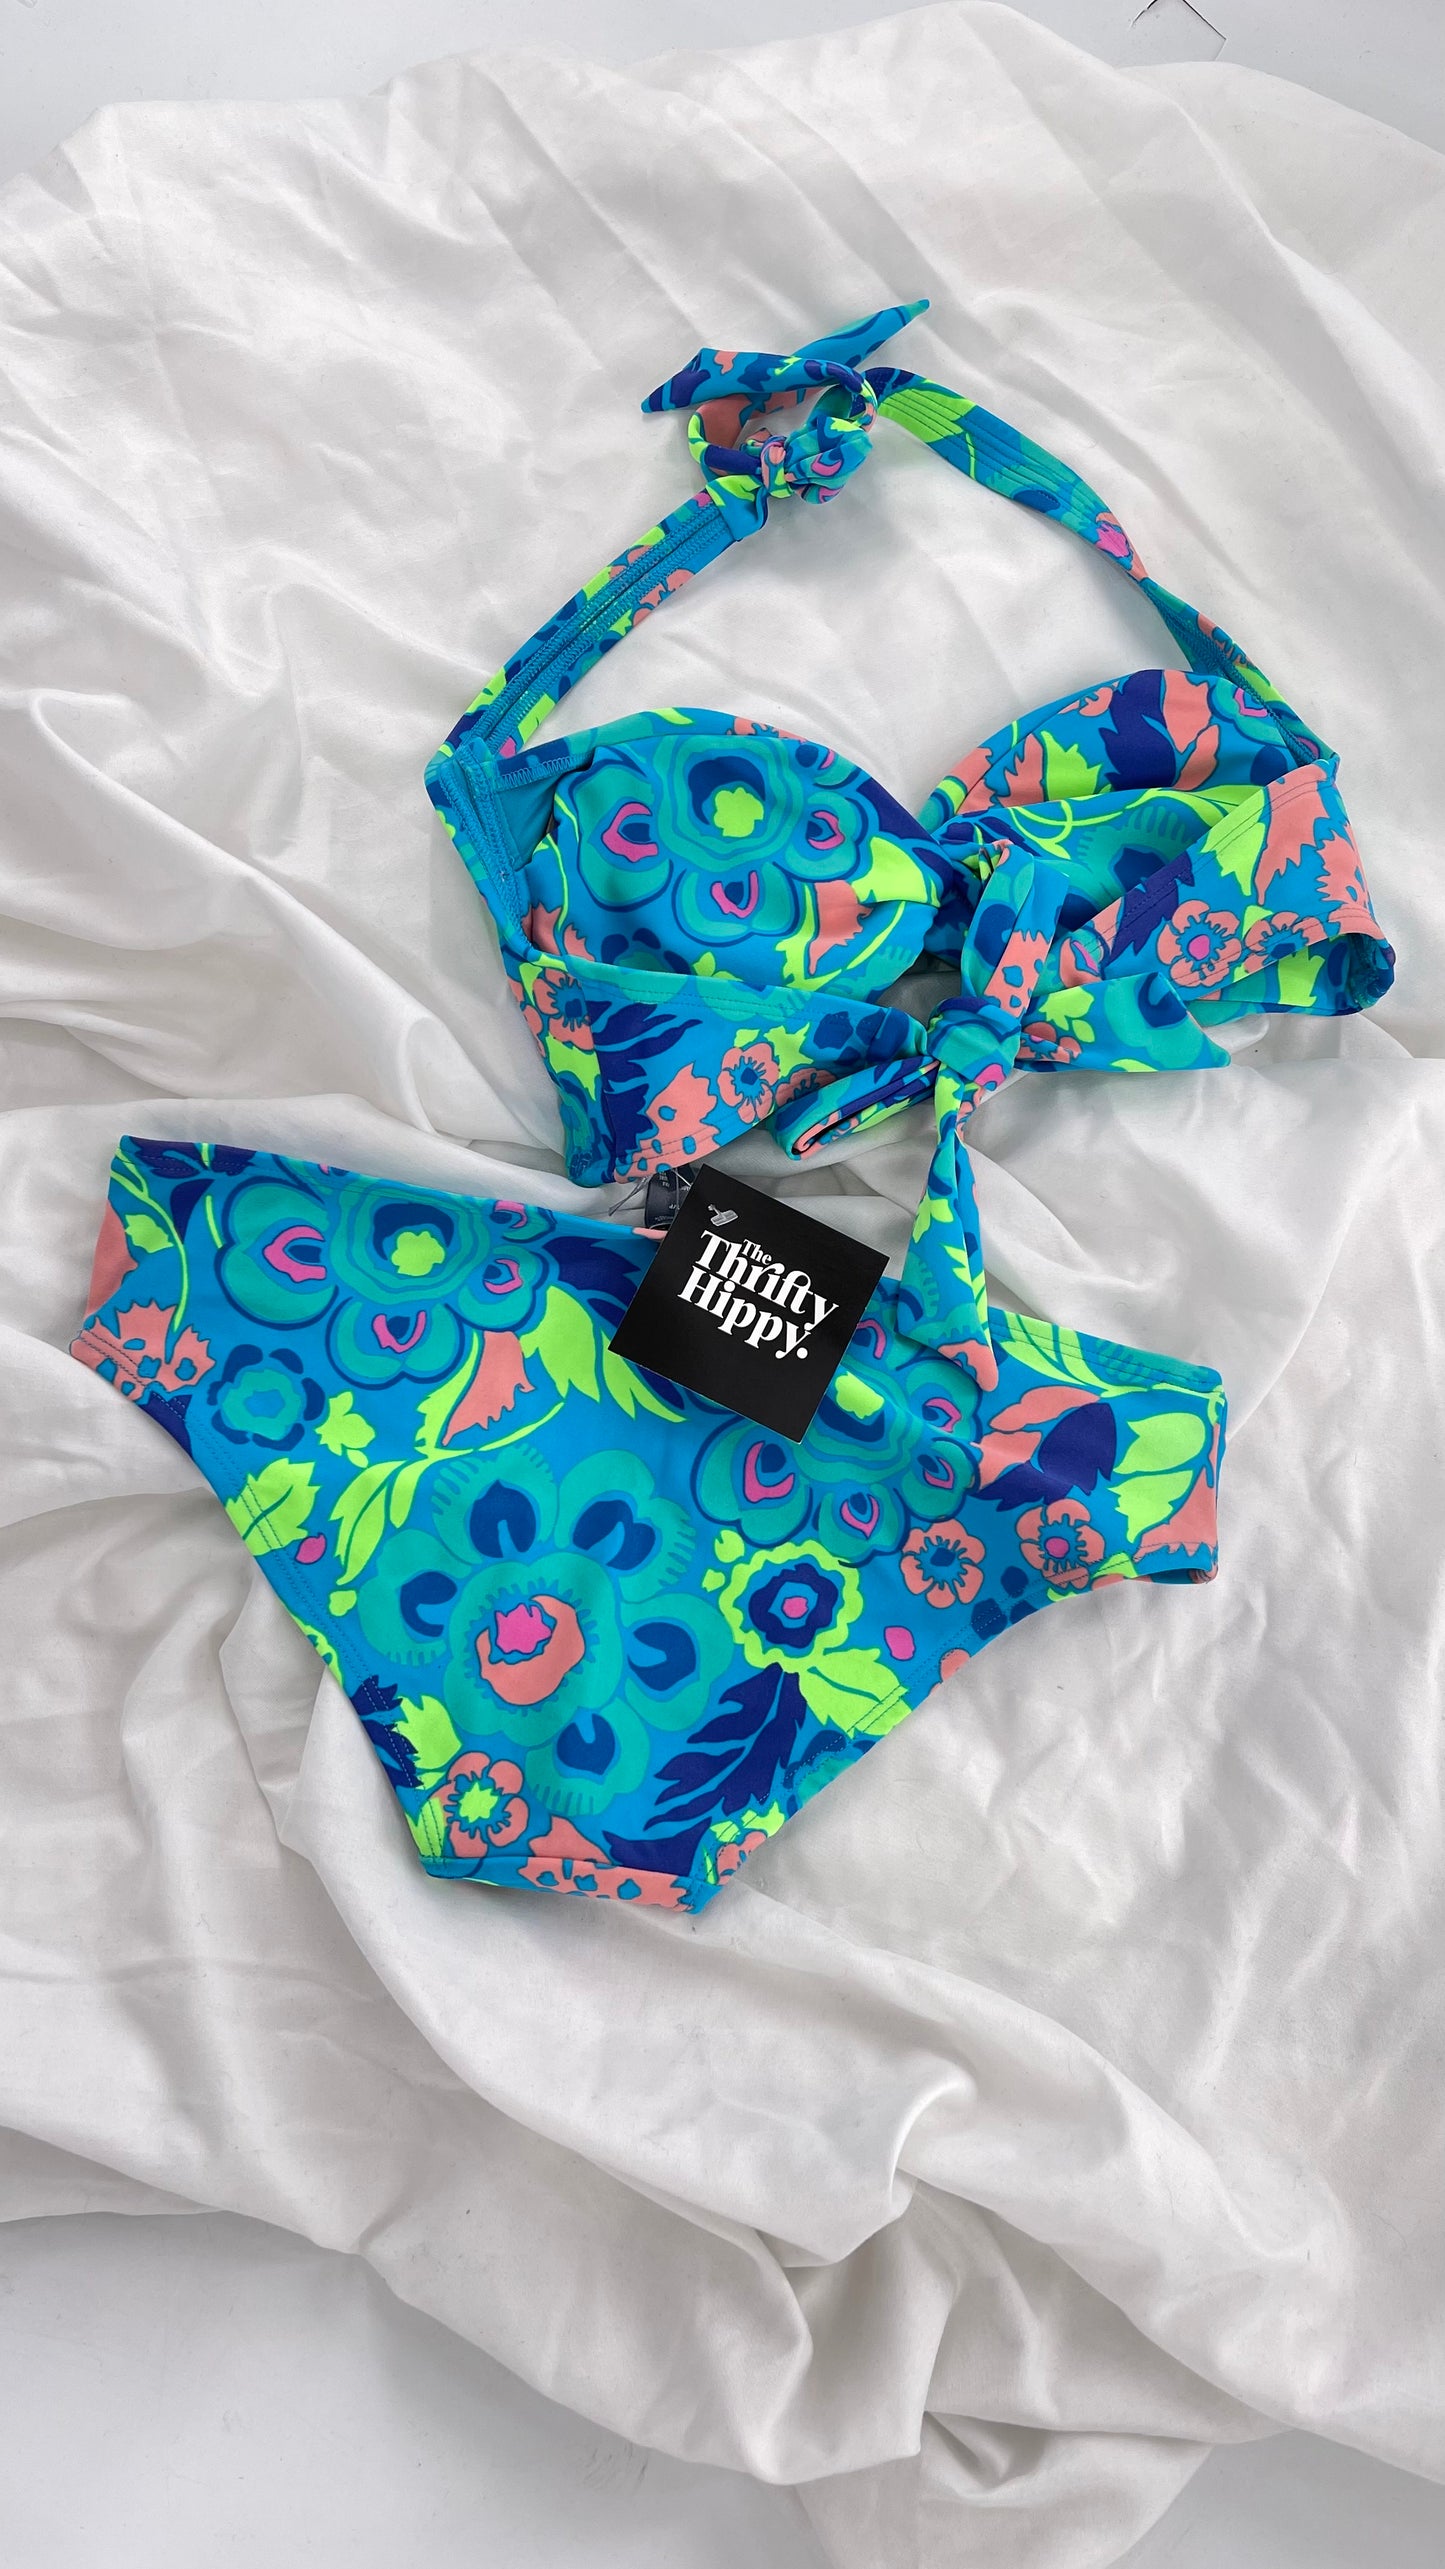 AERIE Blue Paisley Swim Set with Tags Attached (M Top S Bottoms)